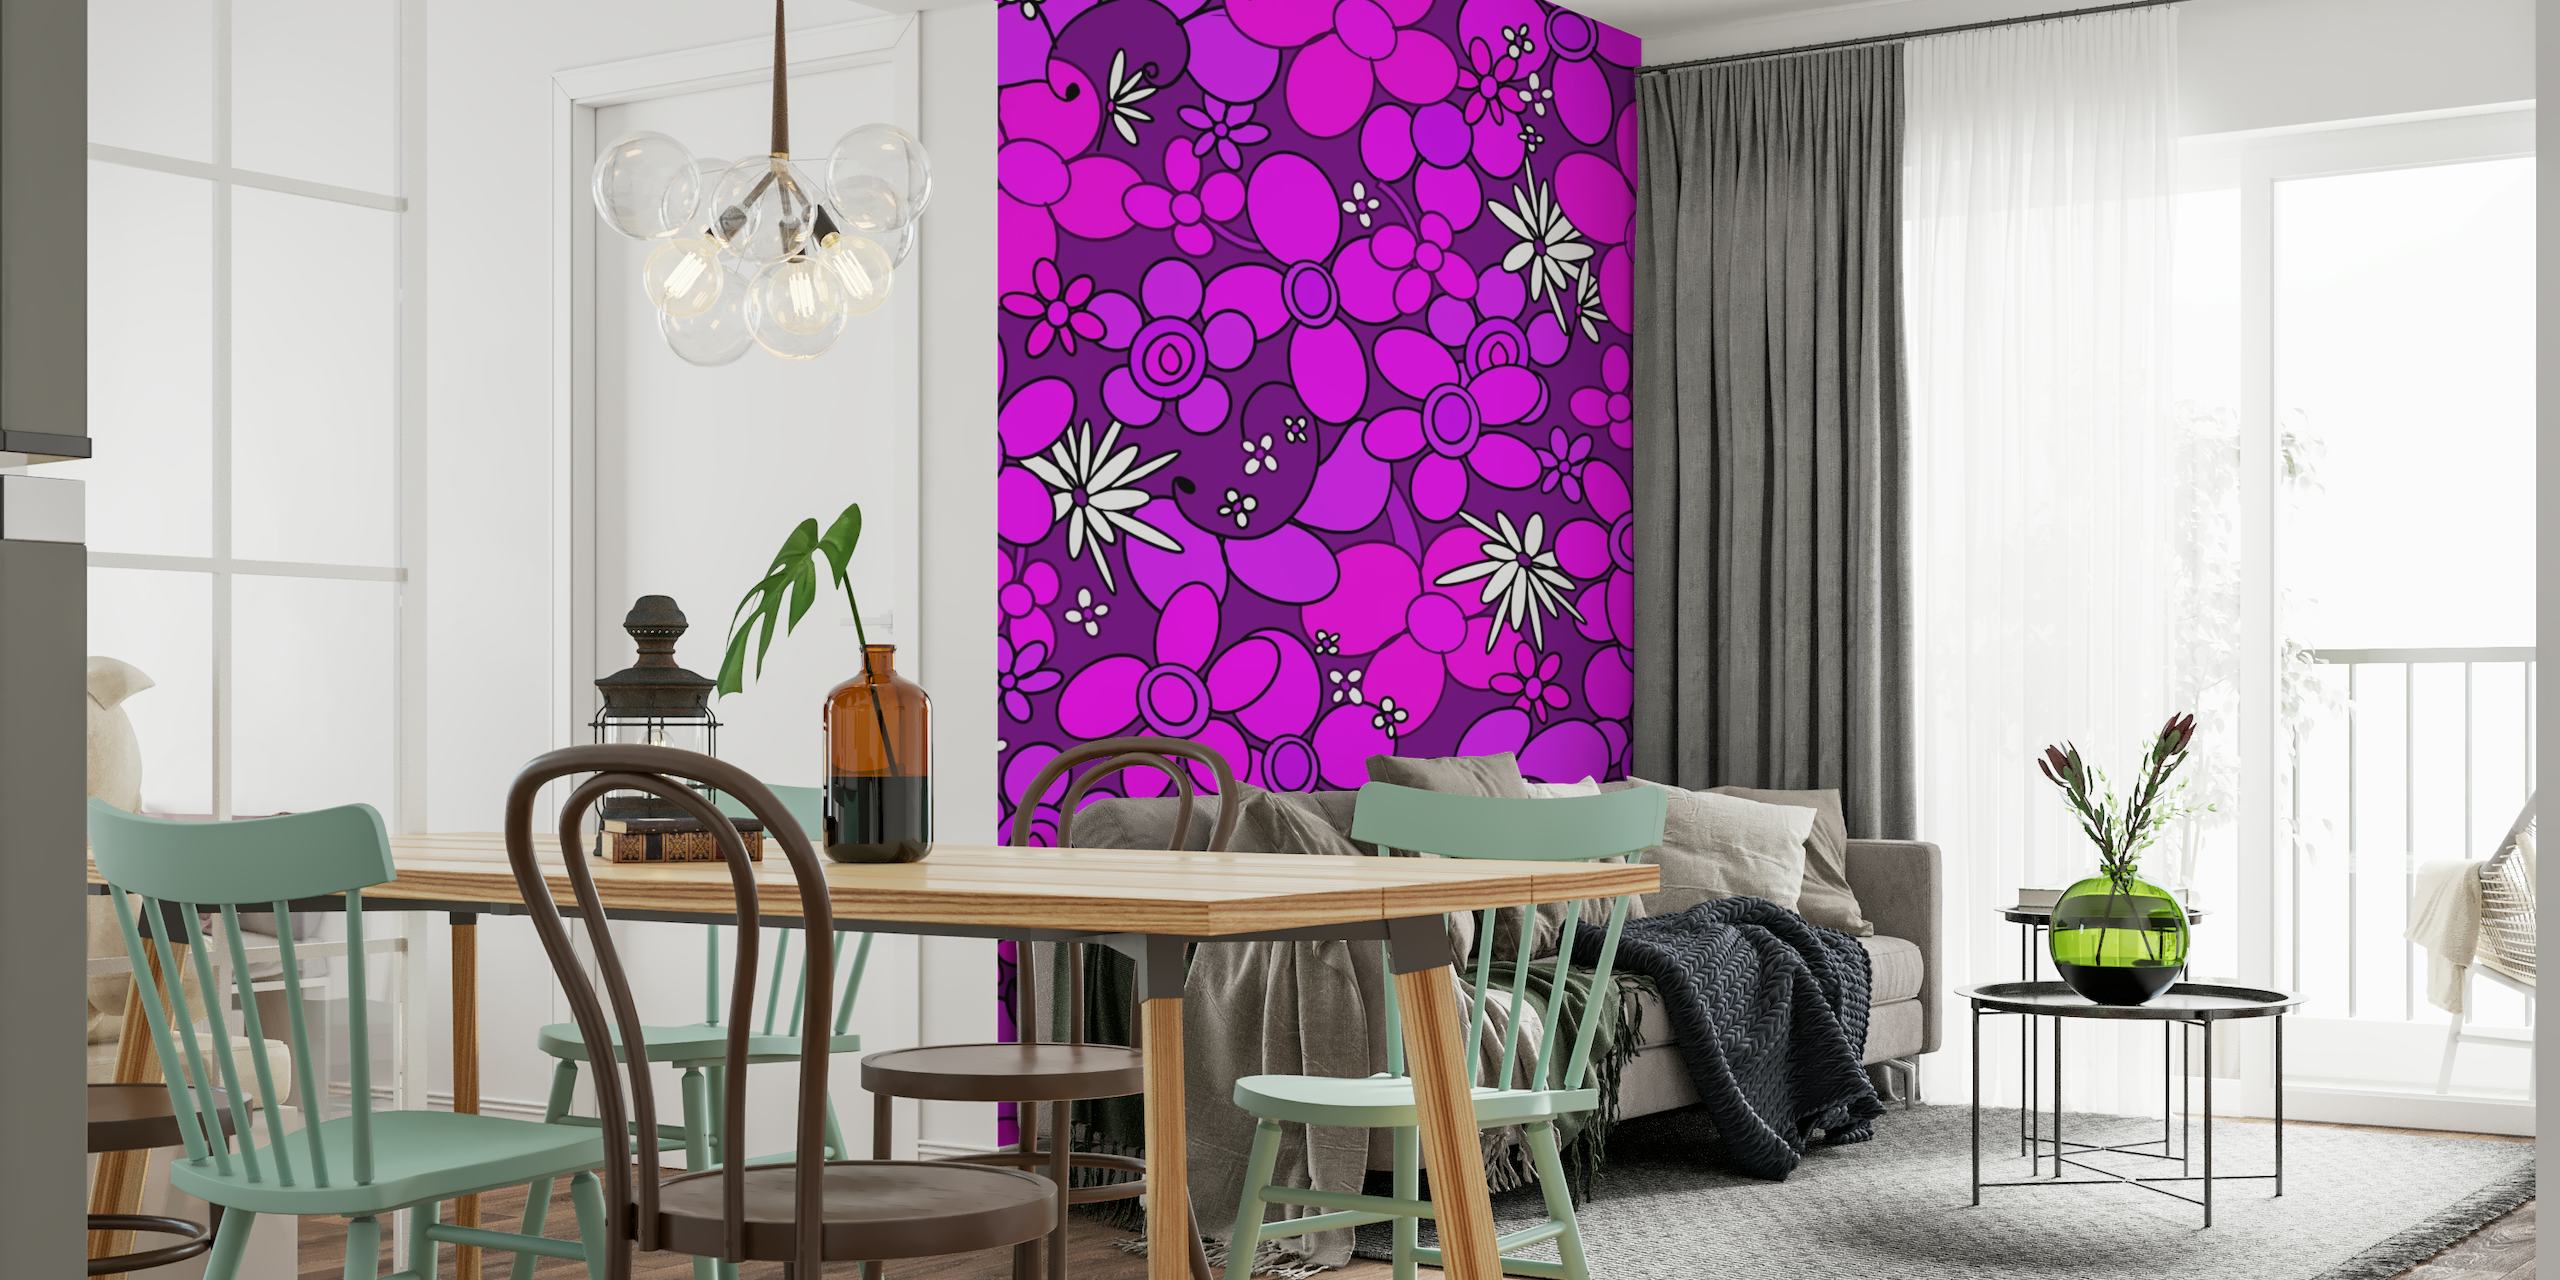 1960s and 1970s style vibrant purple and magenta retro flower pattern wall mural